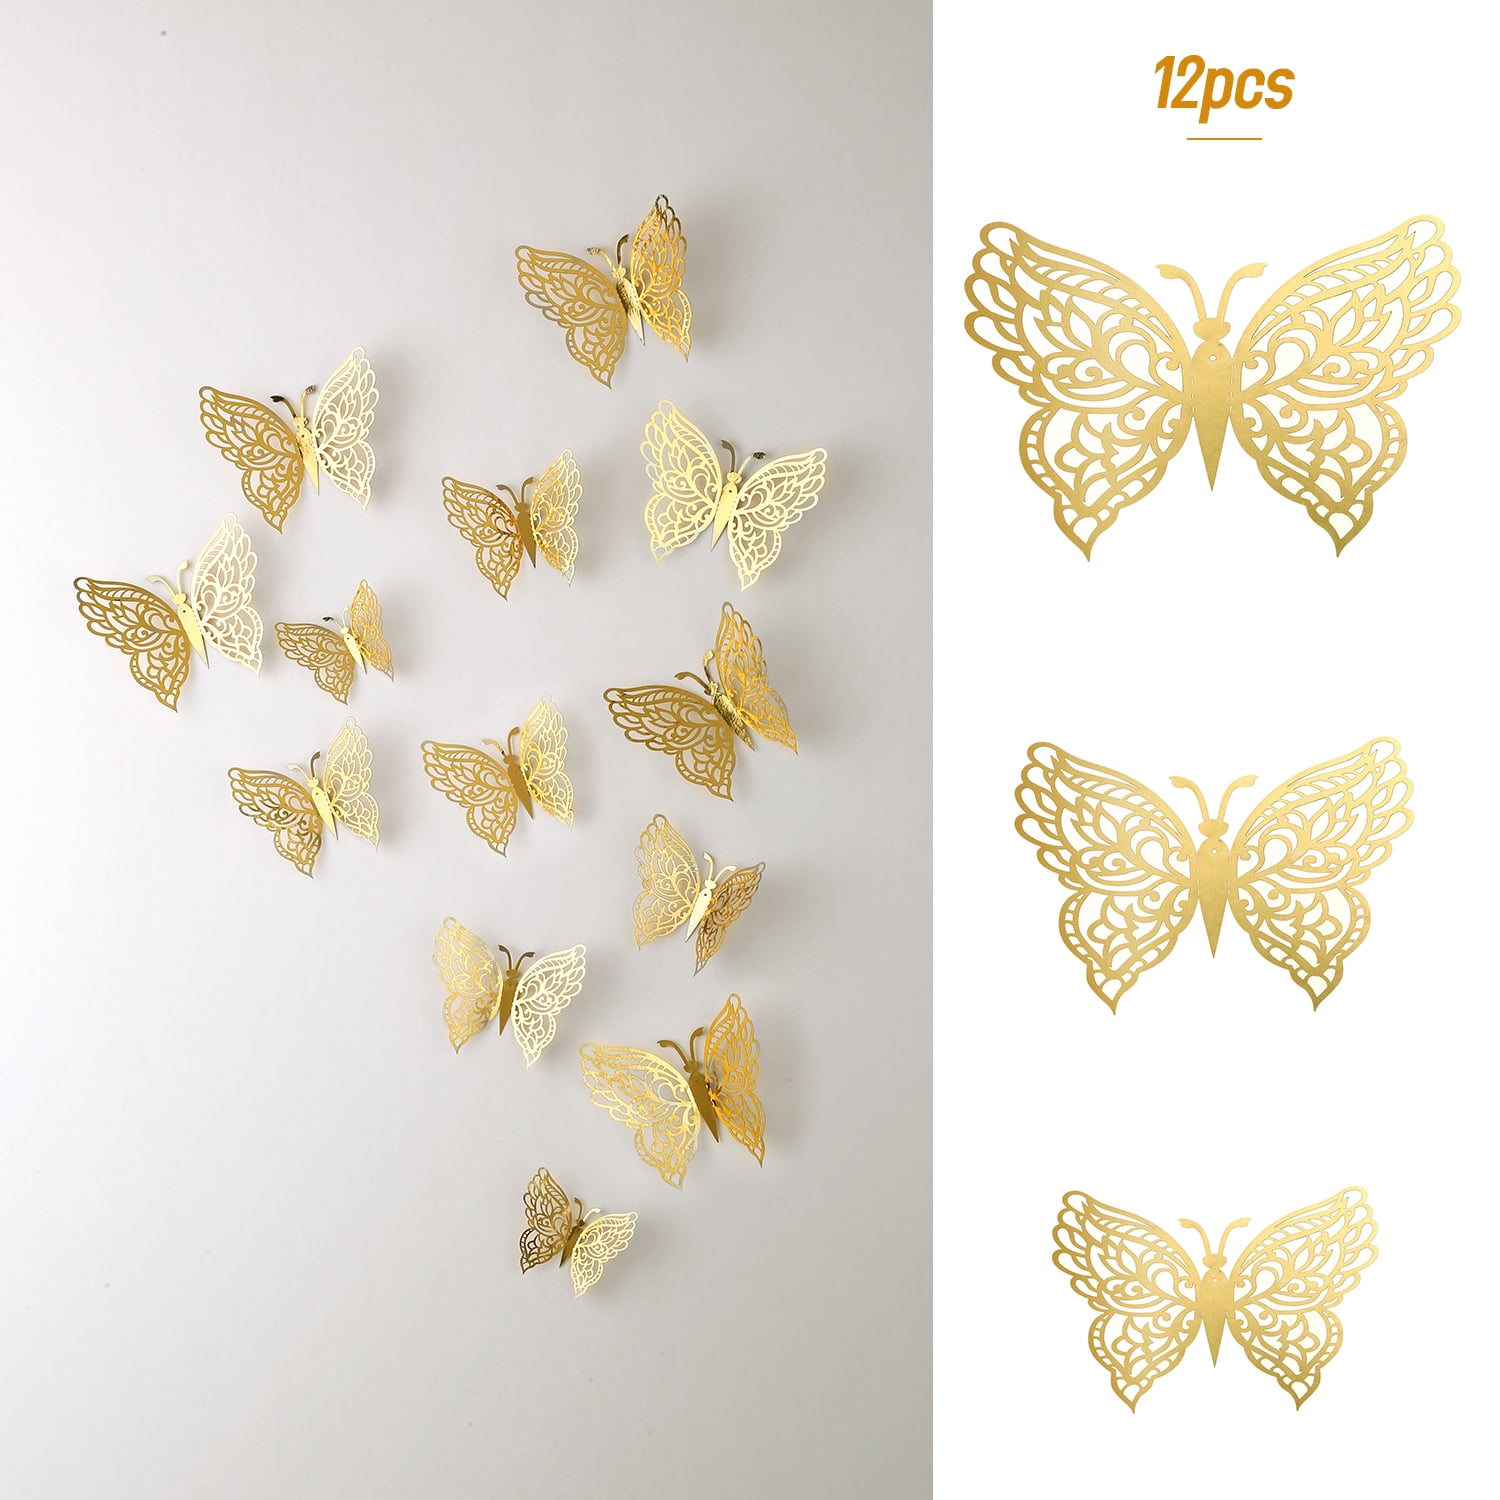 Removable Decals Room Mural Home Decoration for Kids Bedroom/Wedding/Party/DIY Gift 3D Butterfly & Flower Wall Decor Black 12 Pcs 3 Sizes Butterflies & 12 Pcs 3 Sizes Flowers Waterproof Stickers 